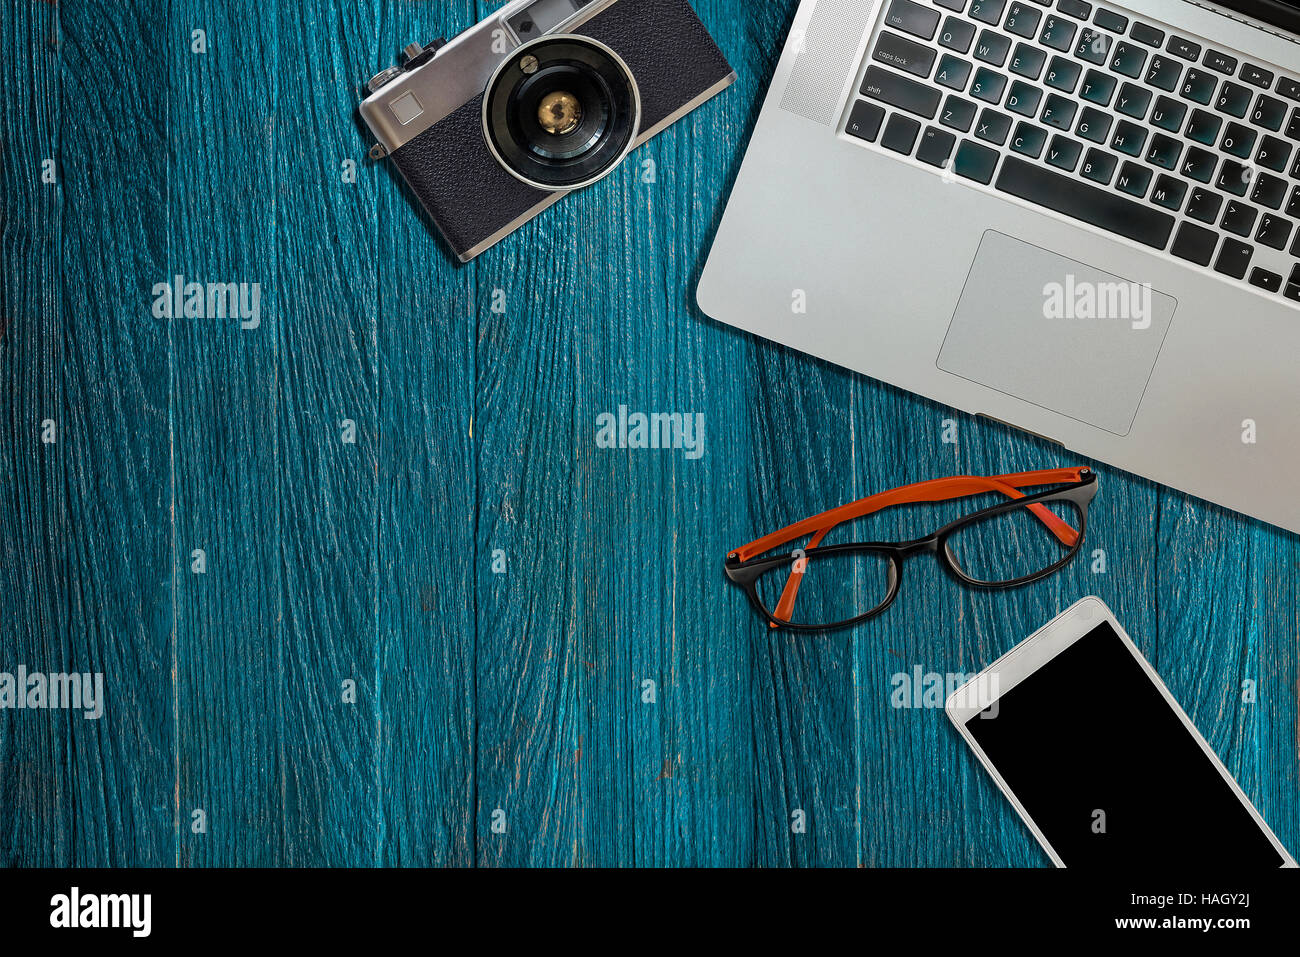 desk office, laptop, camera, eyes glasses, phone on blue wooden background. Ready for work Stock Photo